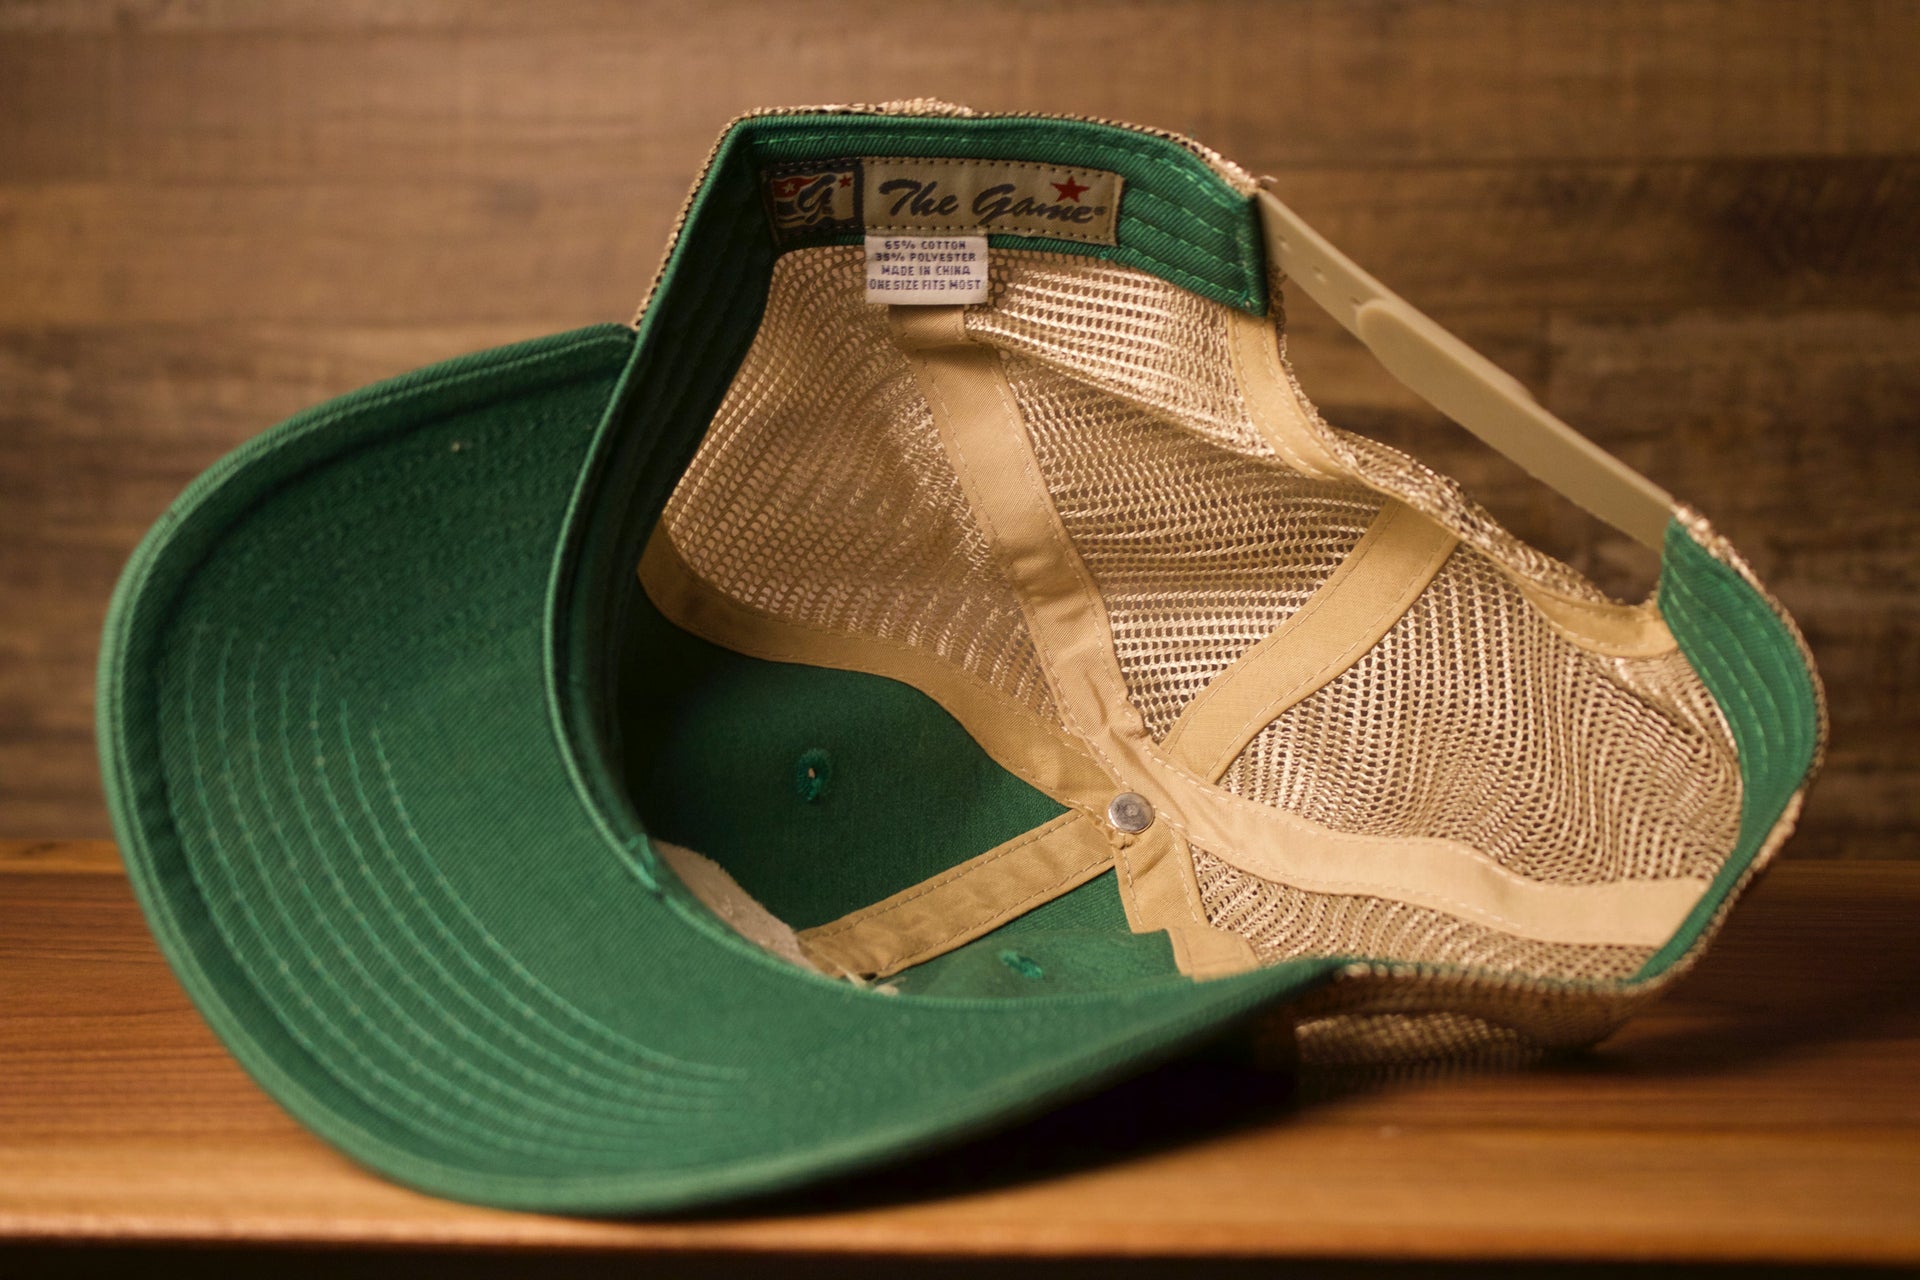 the underbrim of this hat is also kelly green Wildwood New Jersey Kelly Green / Khaki Mesh-Back Trucker Hat